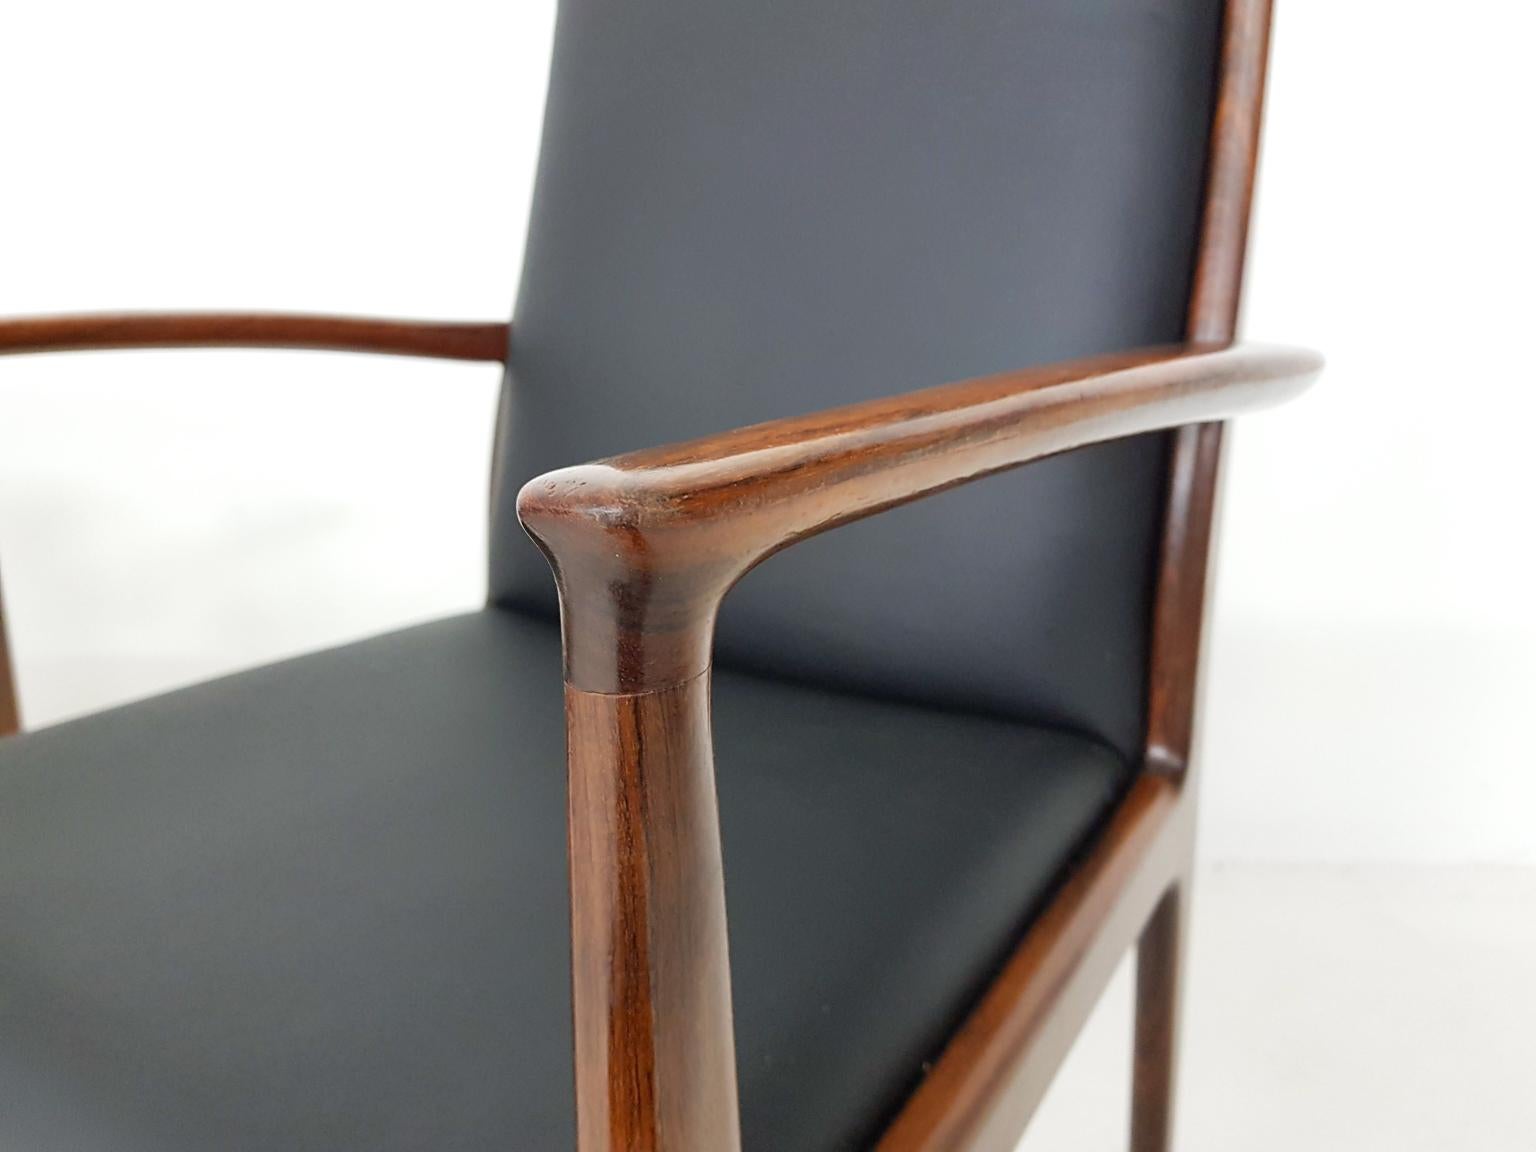 20th Century Set of 4 Rosewood and Black Leather Dining Chairs, Danish Modern, 1950s For Sale